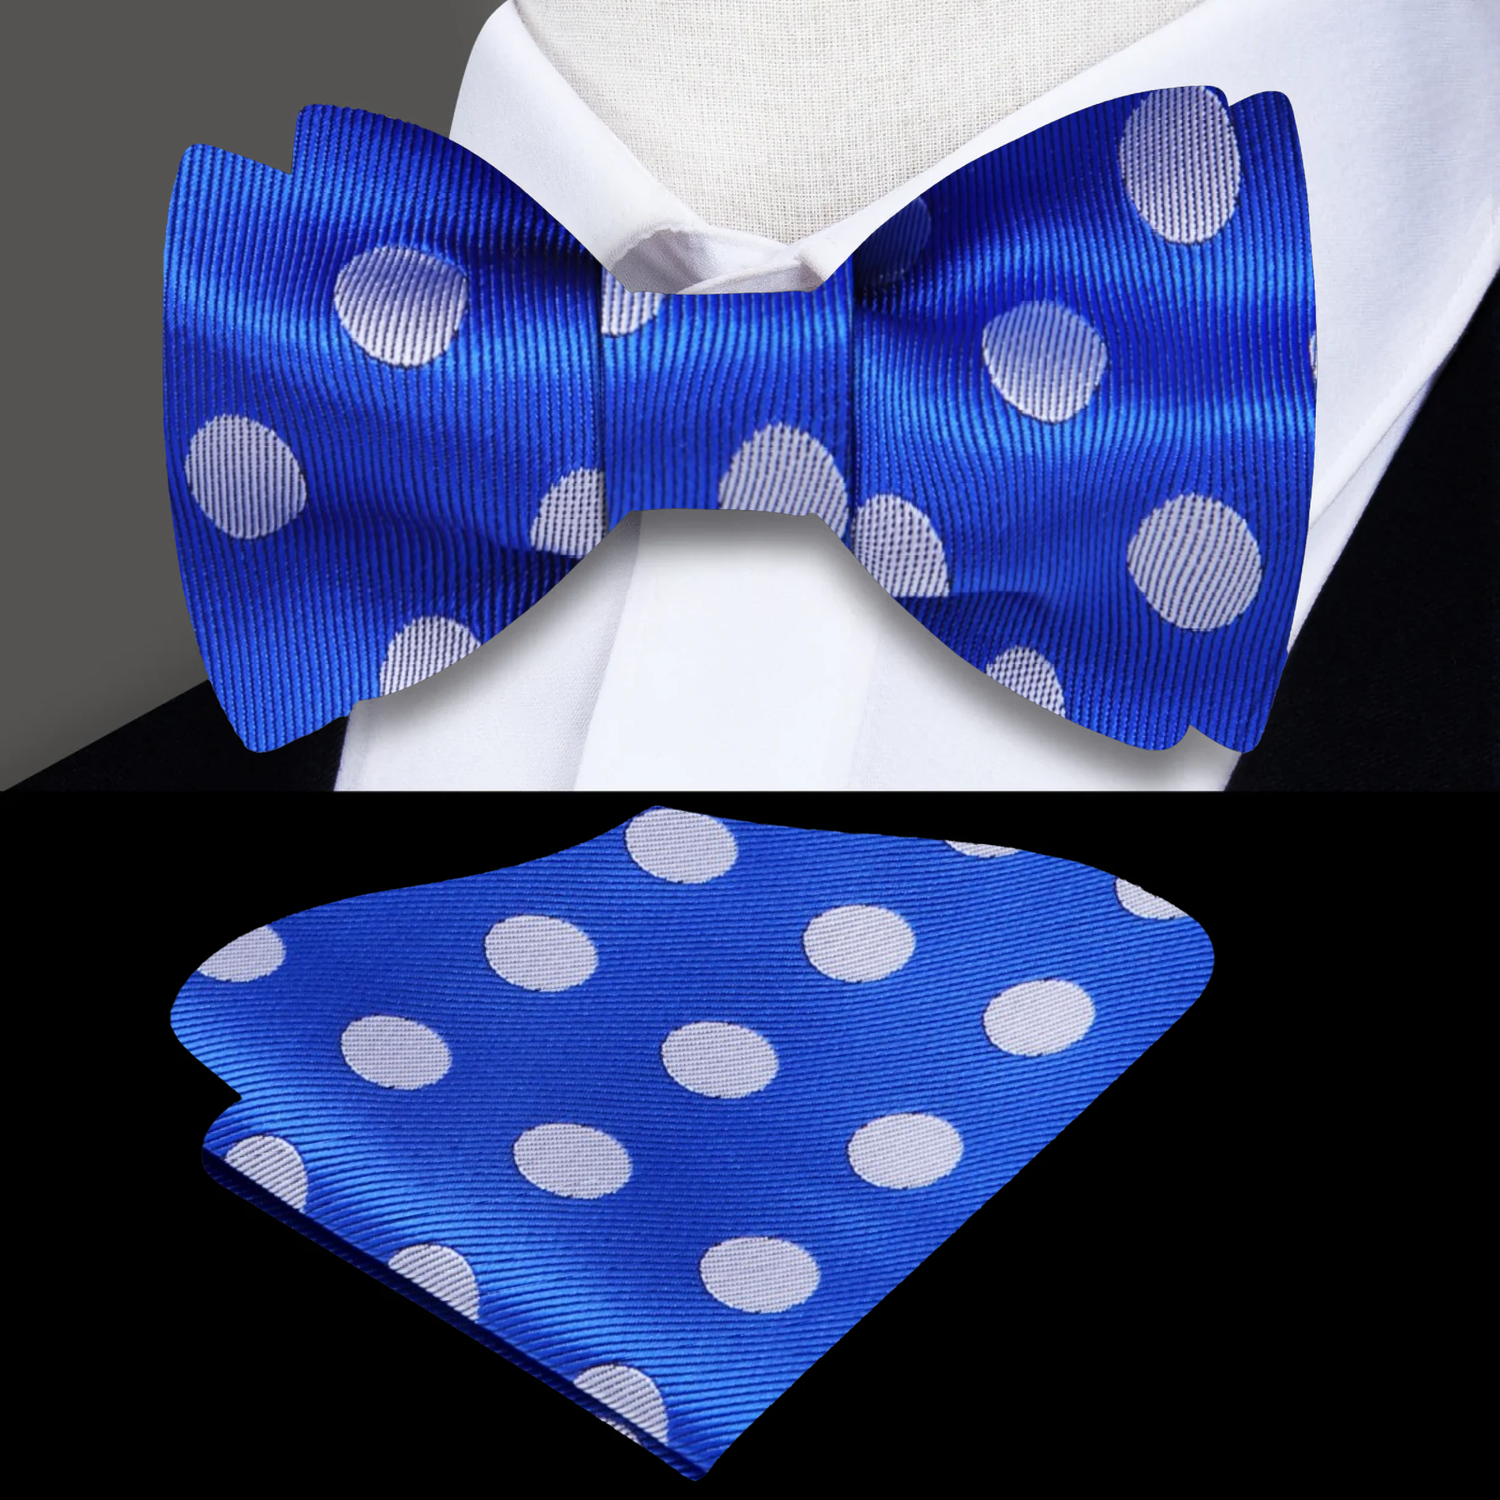 A Blue, Grey Polka Pattern Silk Self Tie Bow Tie Bow Tie, Matching Pocket Square